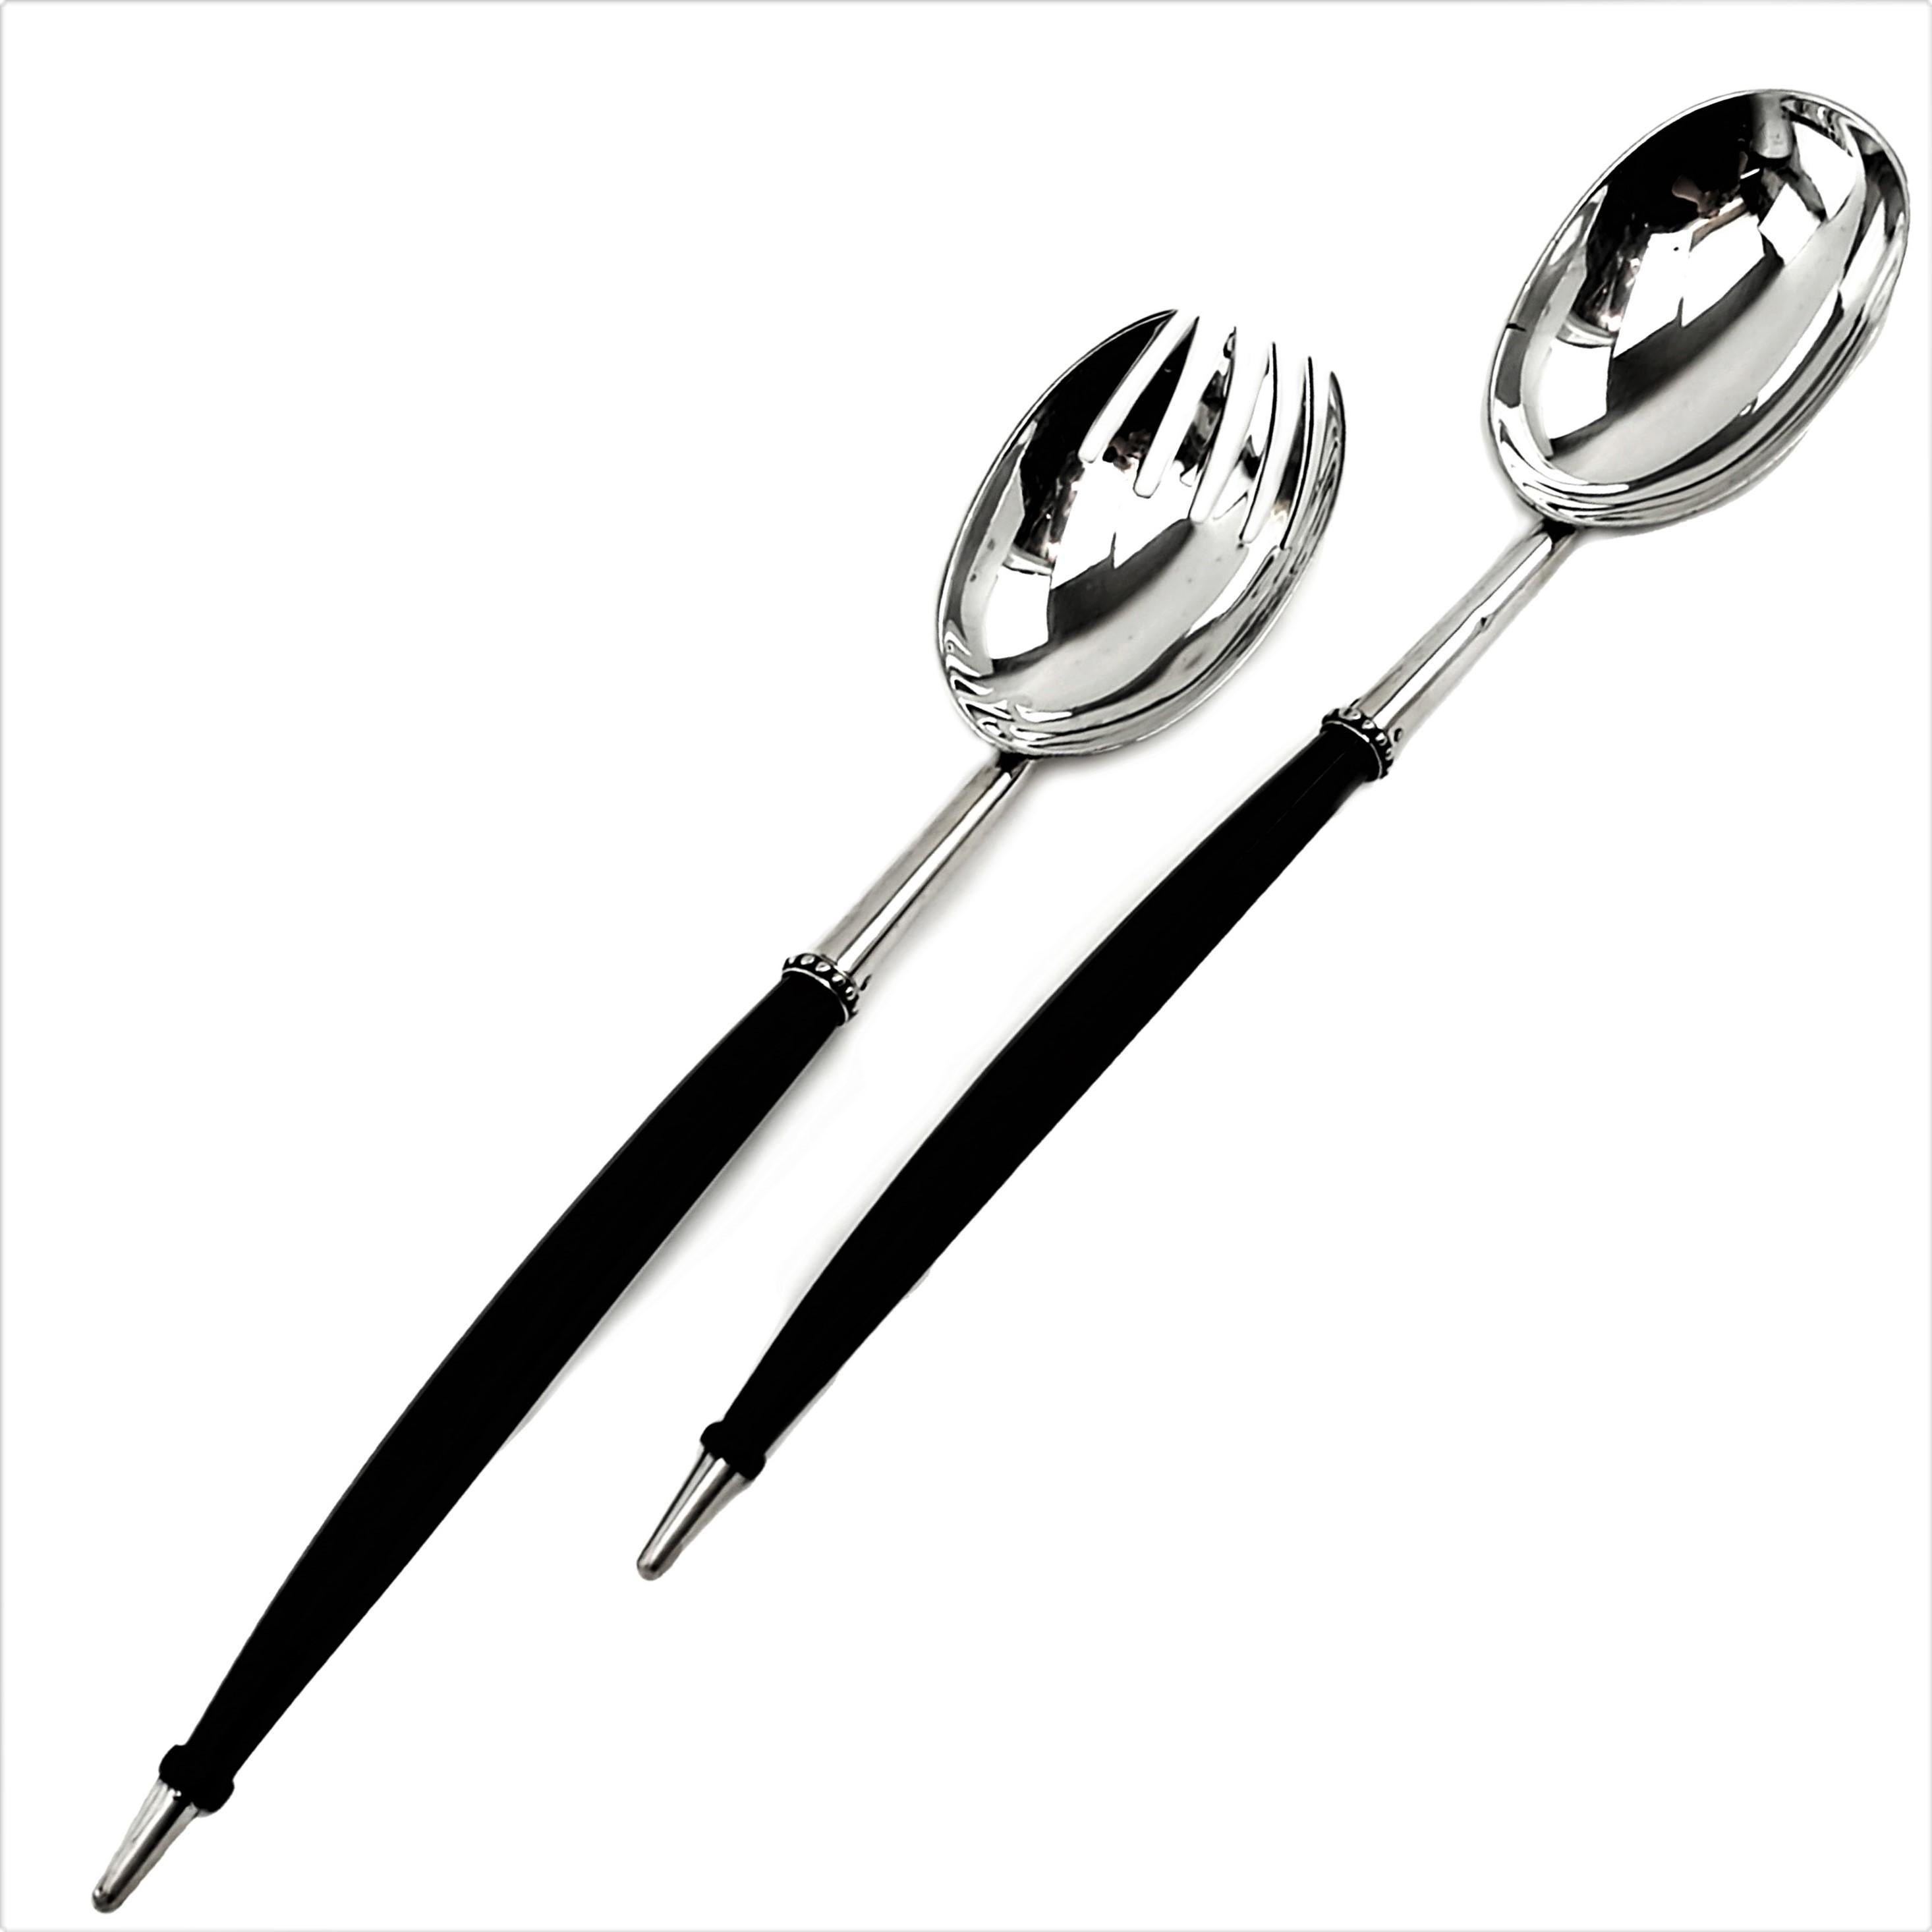 A pair of unusual sterling Silver Salad Servers with octagonal dark brown wooden handles and solid solver bowls, necks and tips. These simple, elegant Servers are embellished only with a subtle beaded band around the top of the handles. The set has